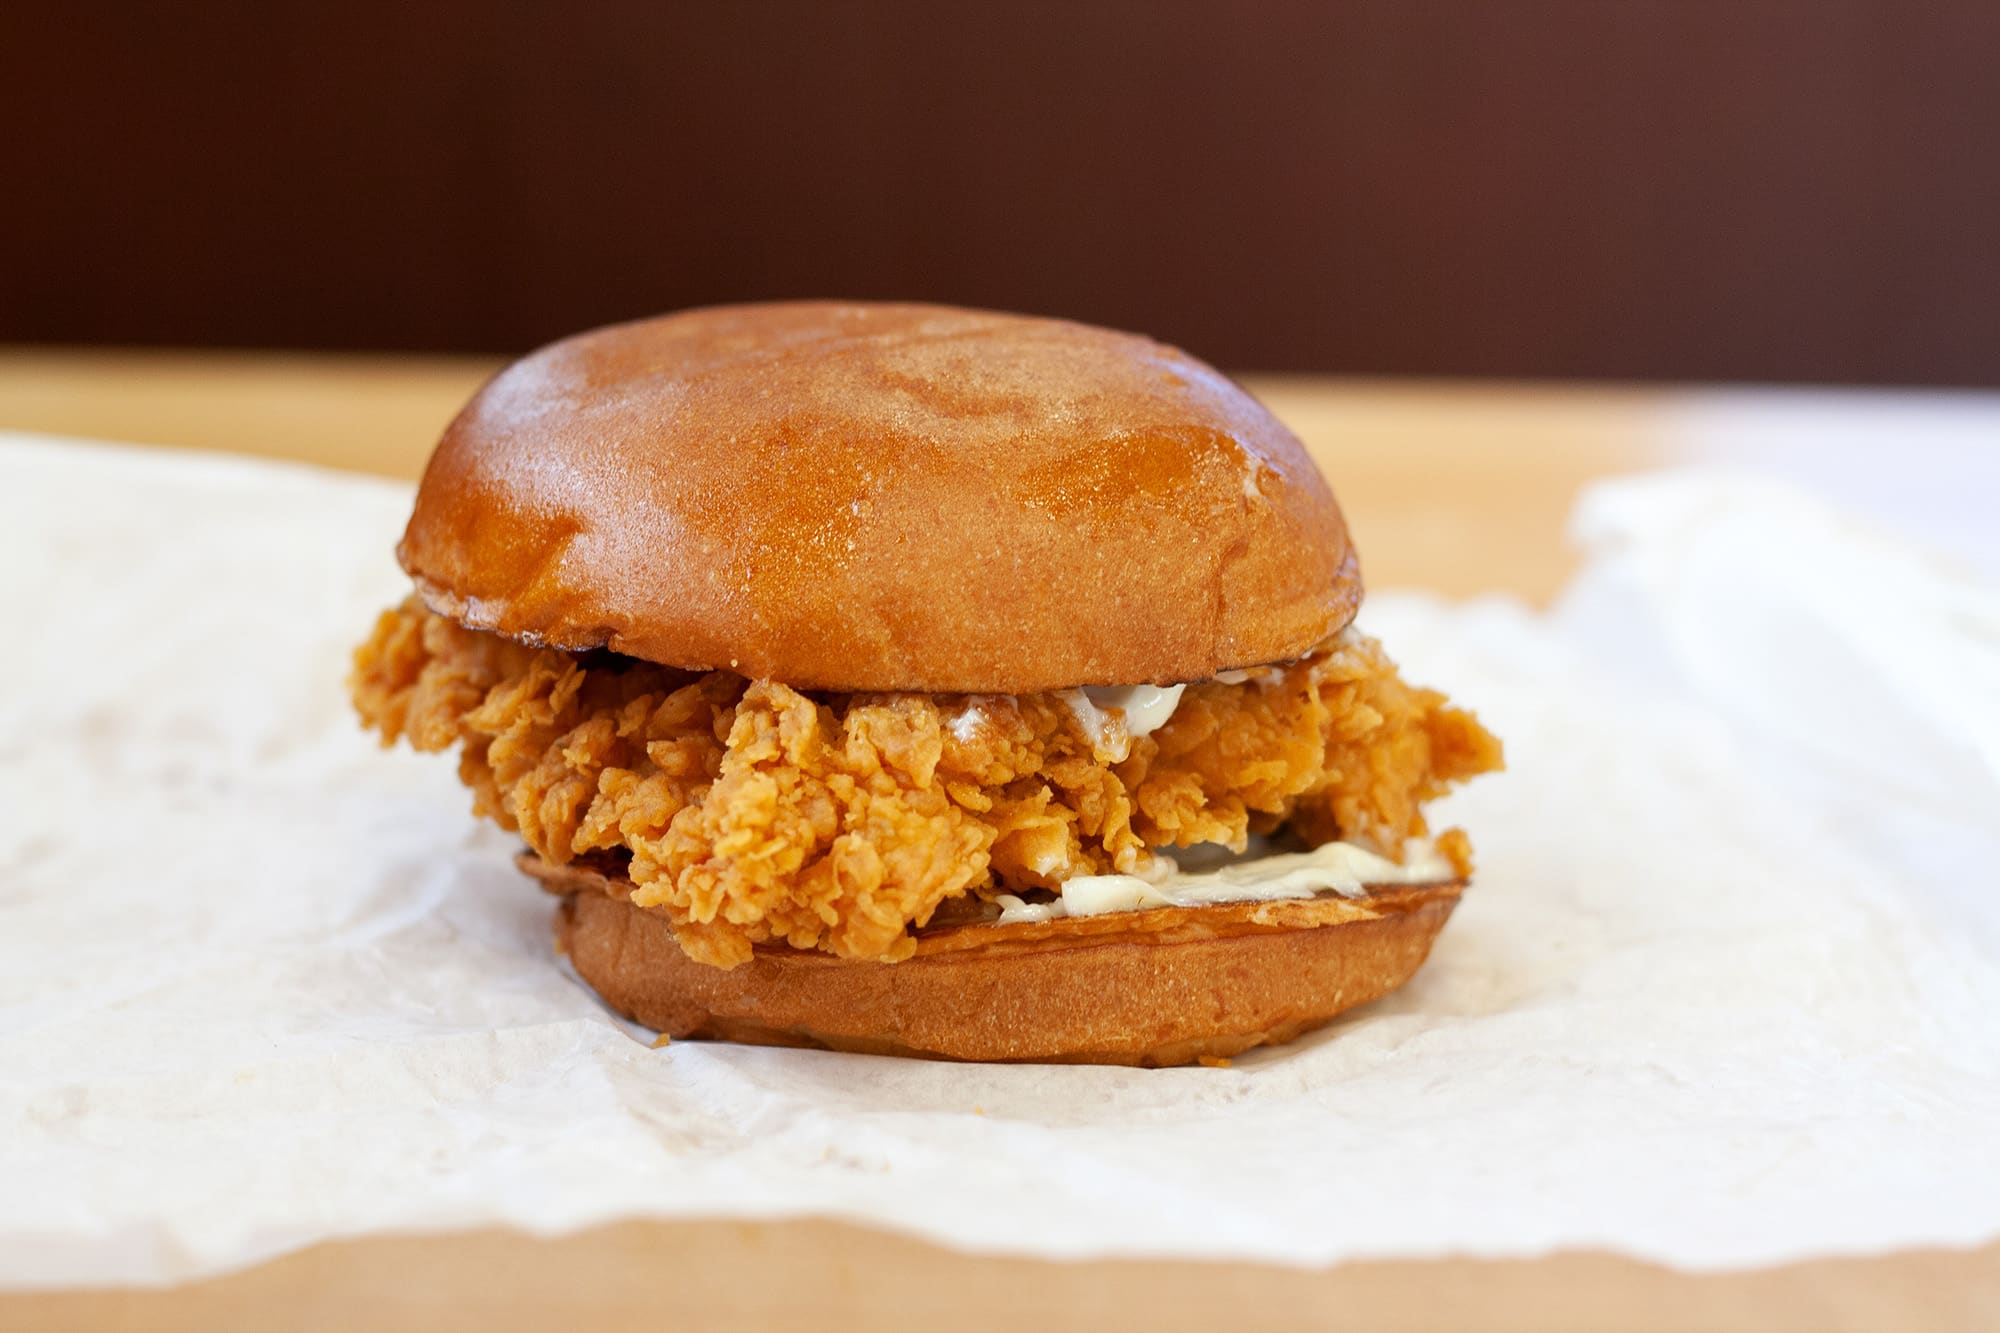 popeyes-sold-an-estimated-1-000-chicken-sandwiches-a-day-doubling